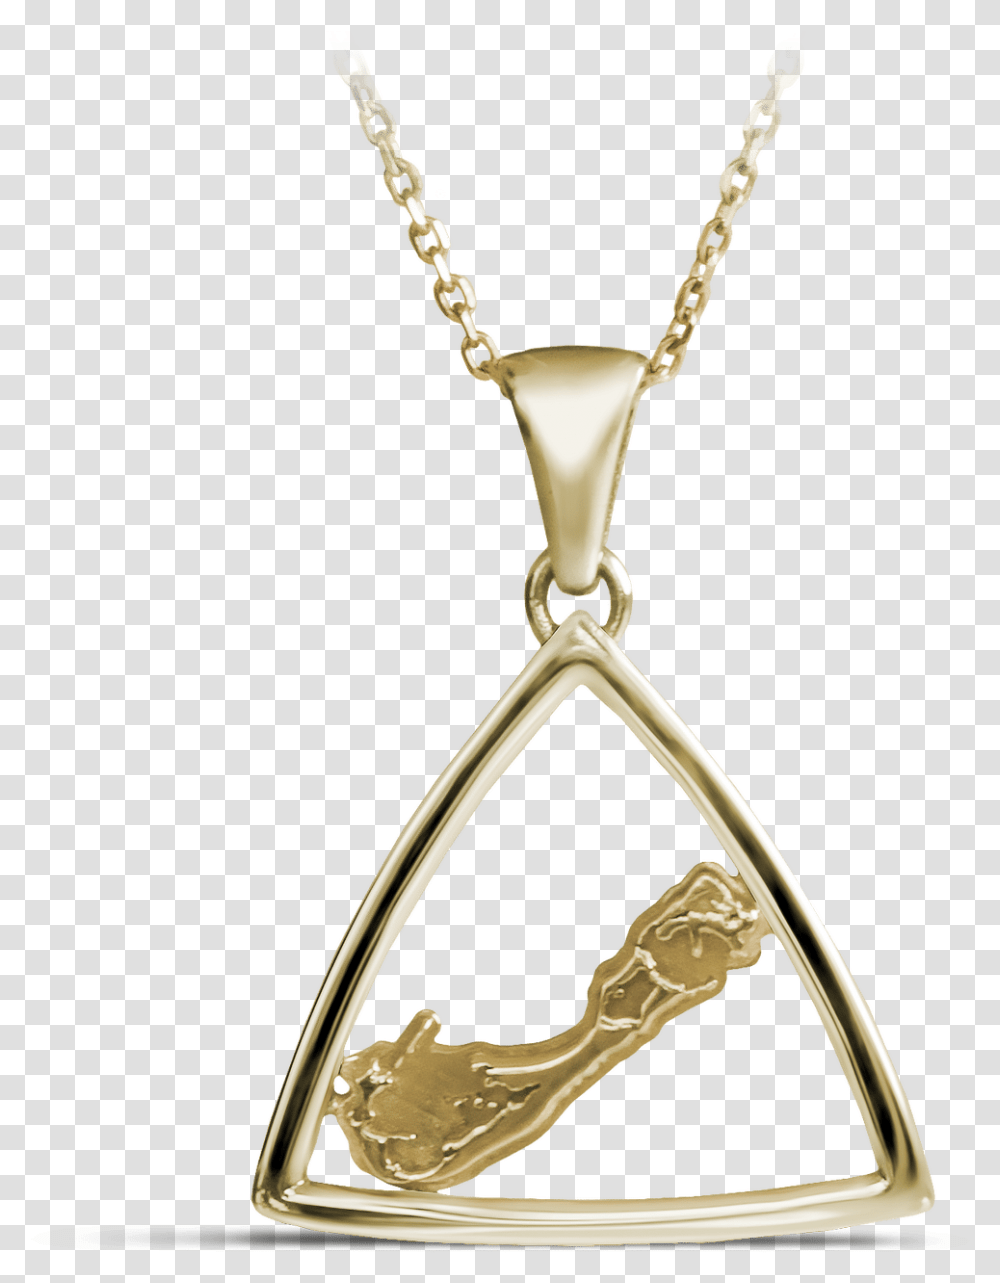 Bermuda Triangle Map In Yellow Gold Locket, Pendant, Jewelry, Accessories, Accessory Transparent Png